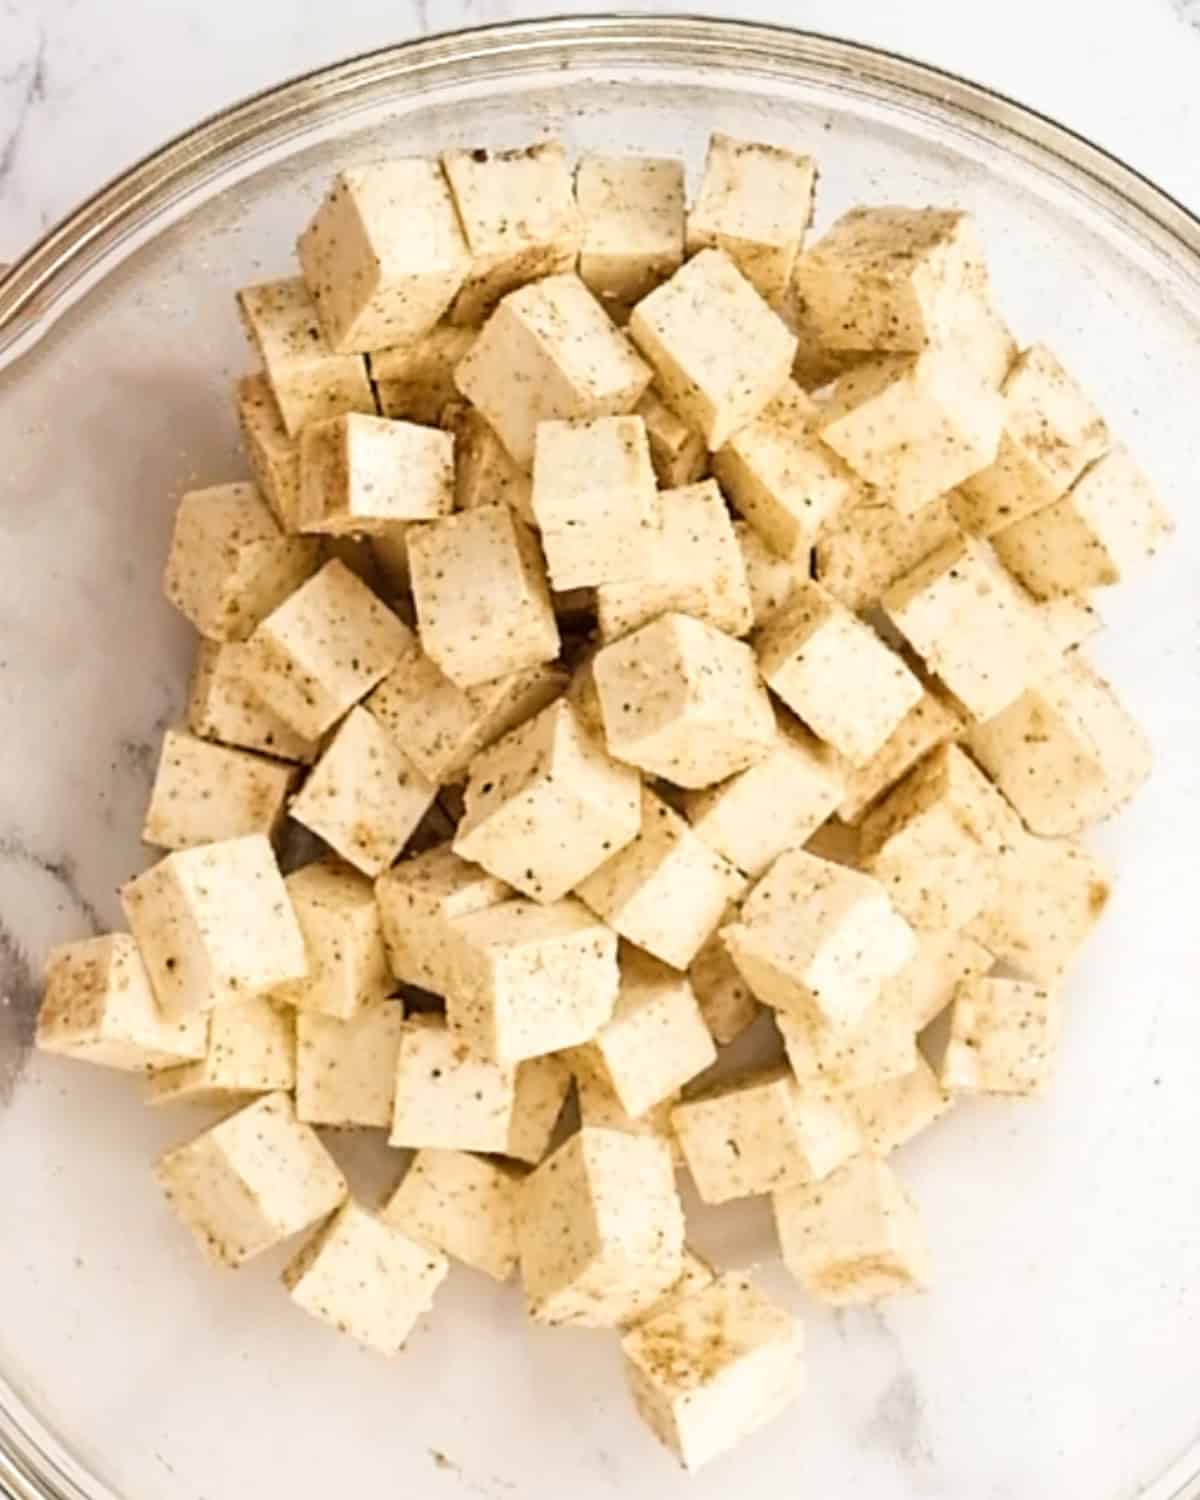 How to Make Baked Crispy Tofu after mixing in spice mixture